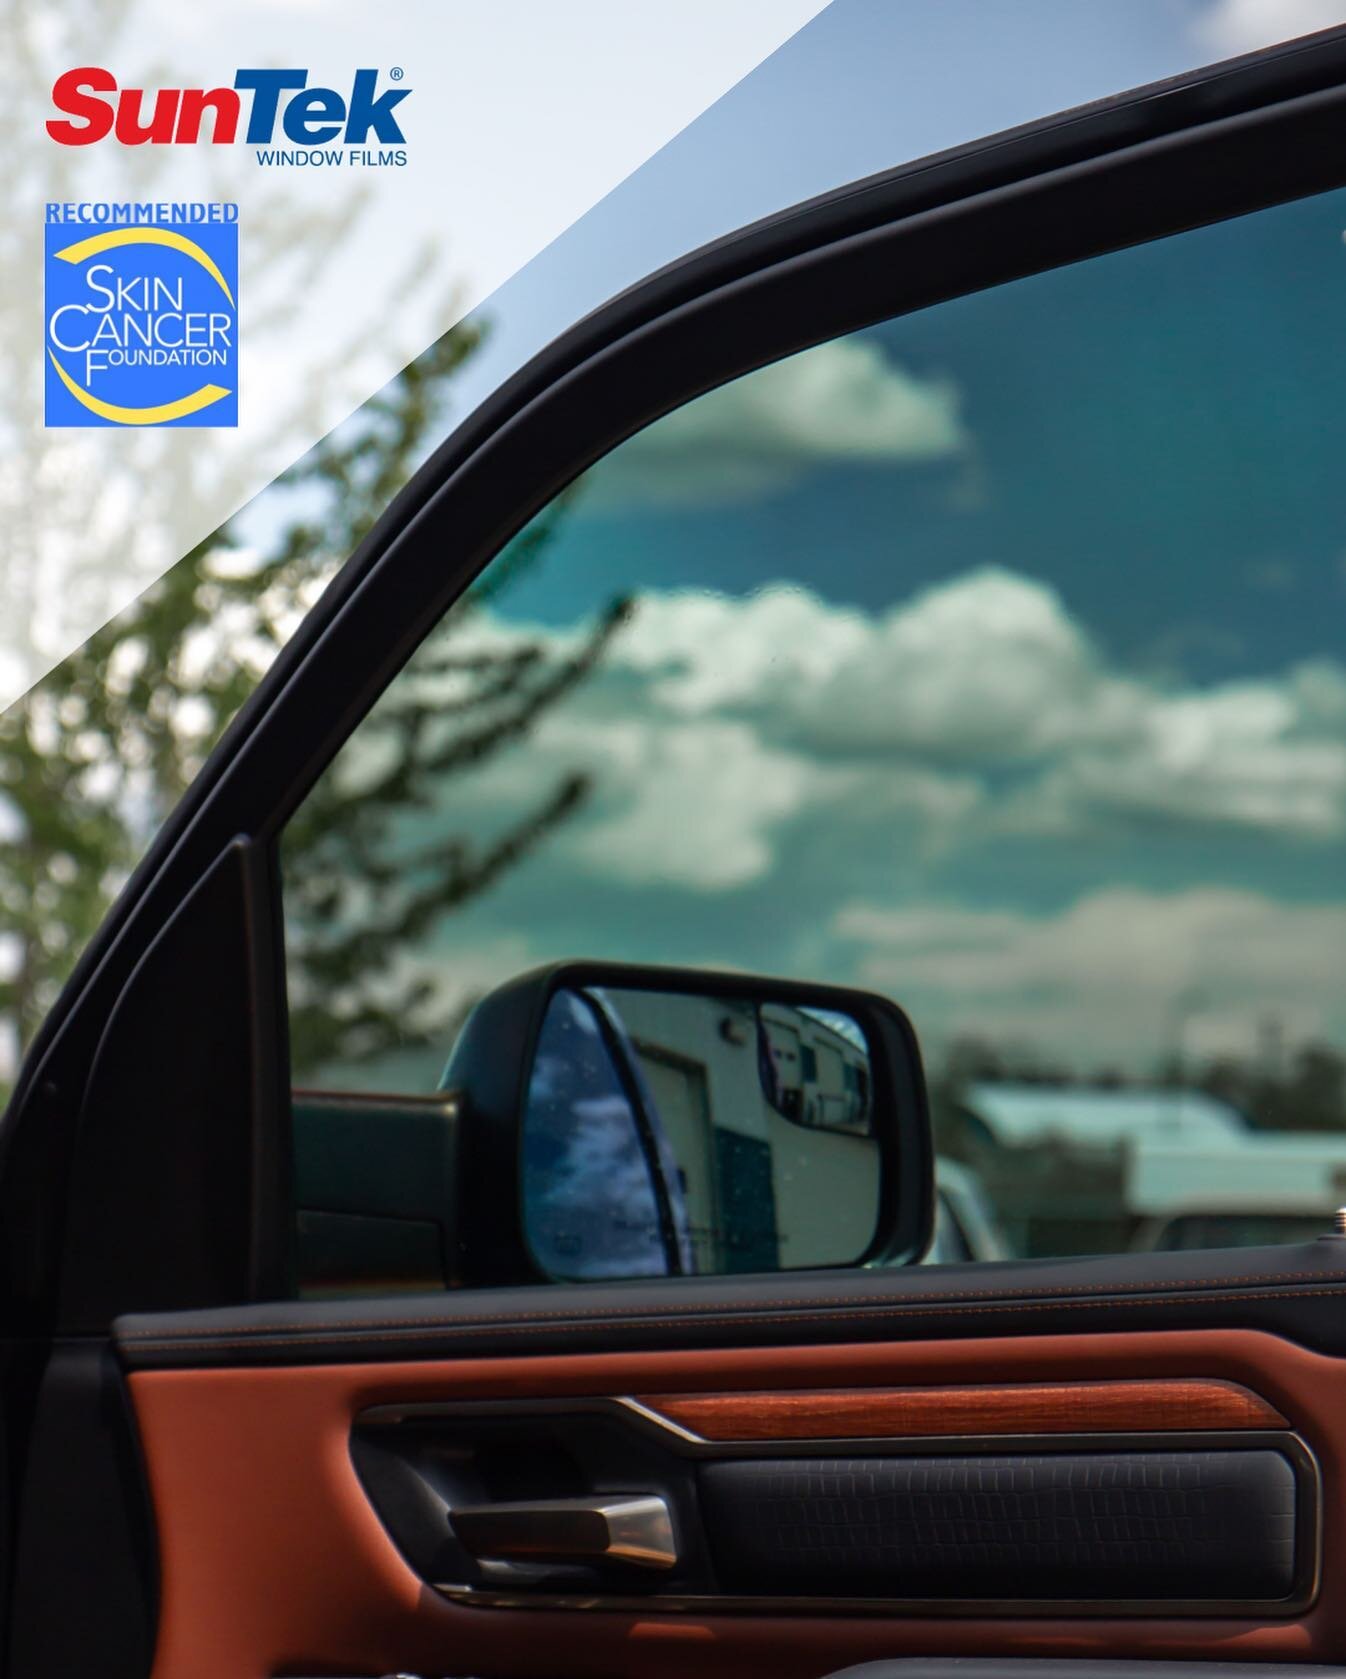 May is Skin Cancer Awareness Month, and we&rsquo;re reminding you to stay sun-safe ☀️😎 More than a sleek look, did you know that SunTek tint also blocks out harmful UV rays?

Our window tint is designed to provide effective broad-spectrum UV protect